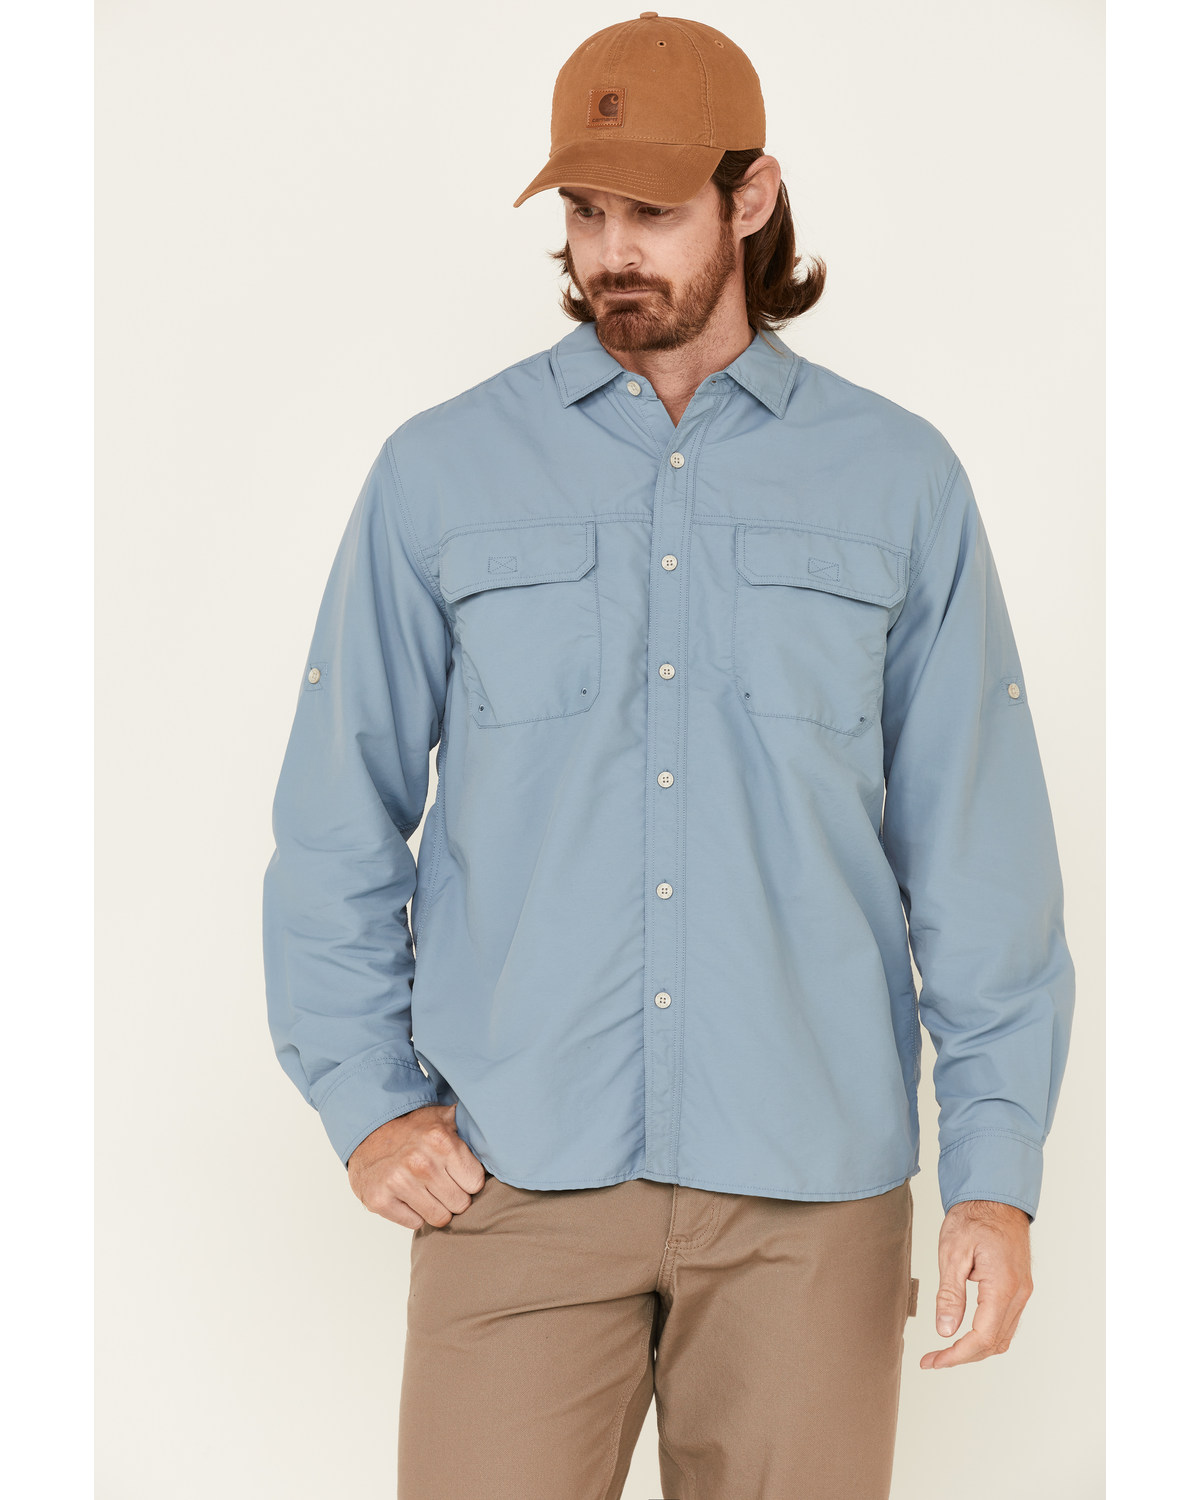 North River Men's Utility Outdoor Long Sleeve Button Down Western Shirt